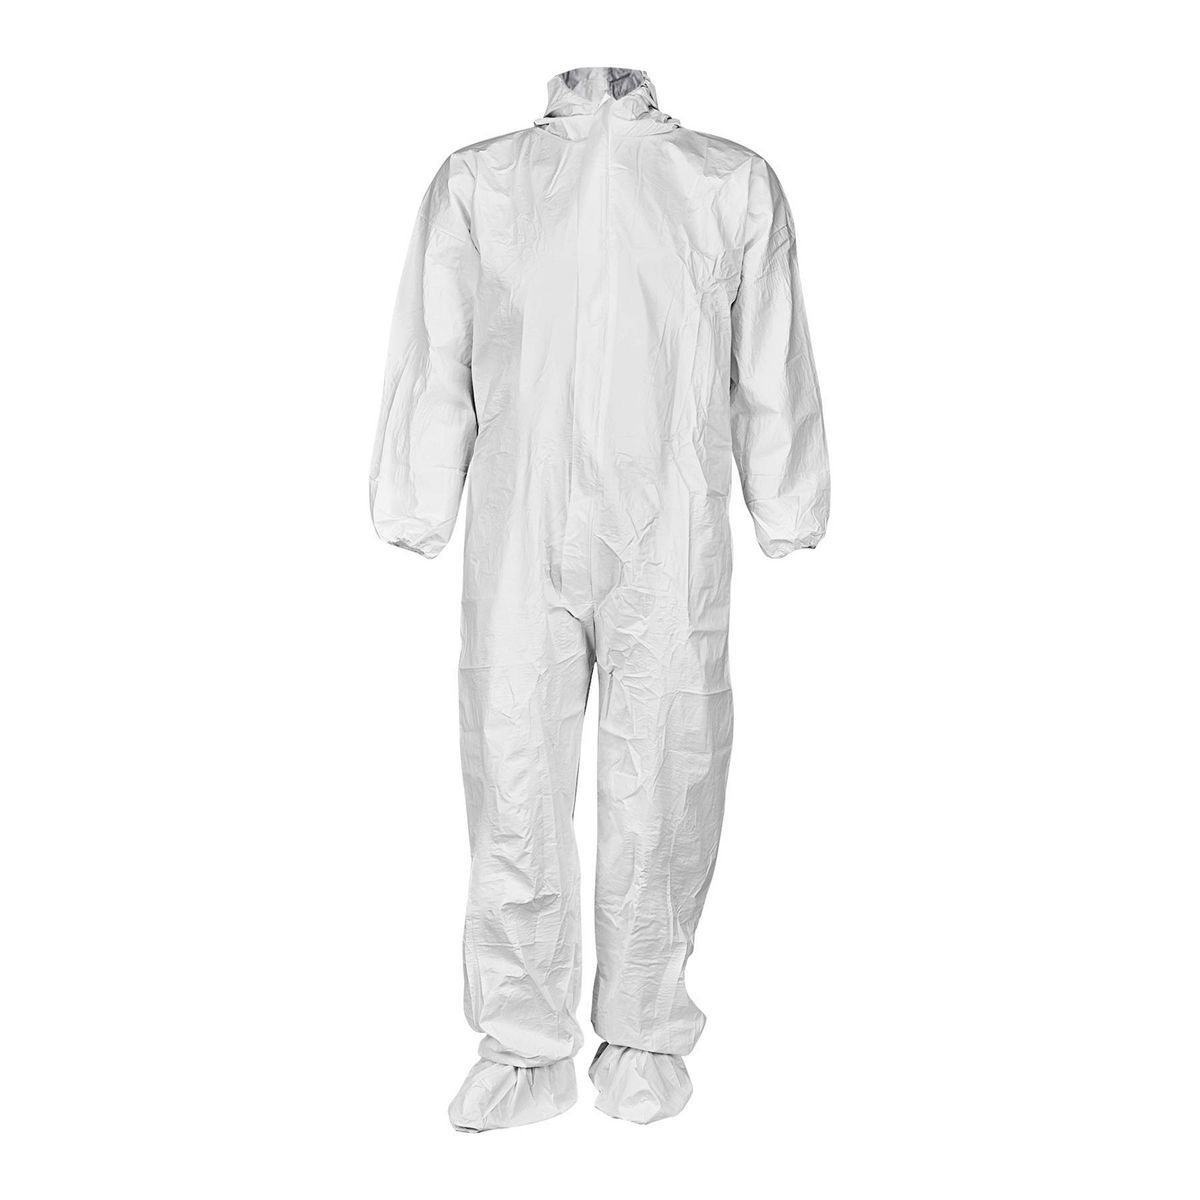 Full Coverage Disposable Protective Suit, X-Large